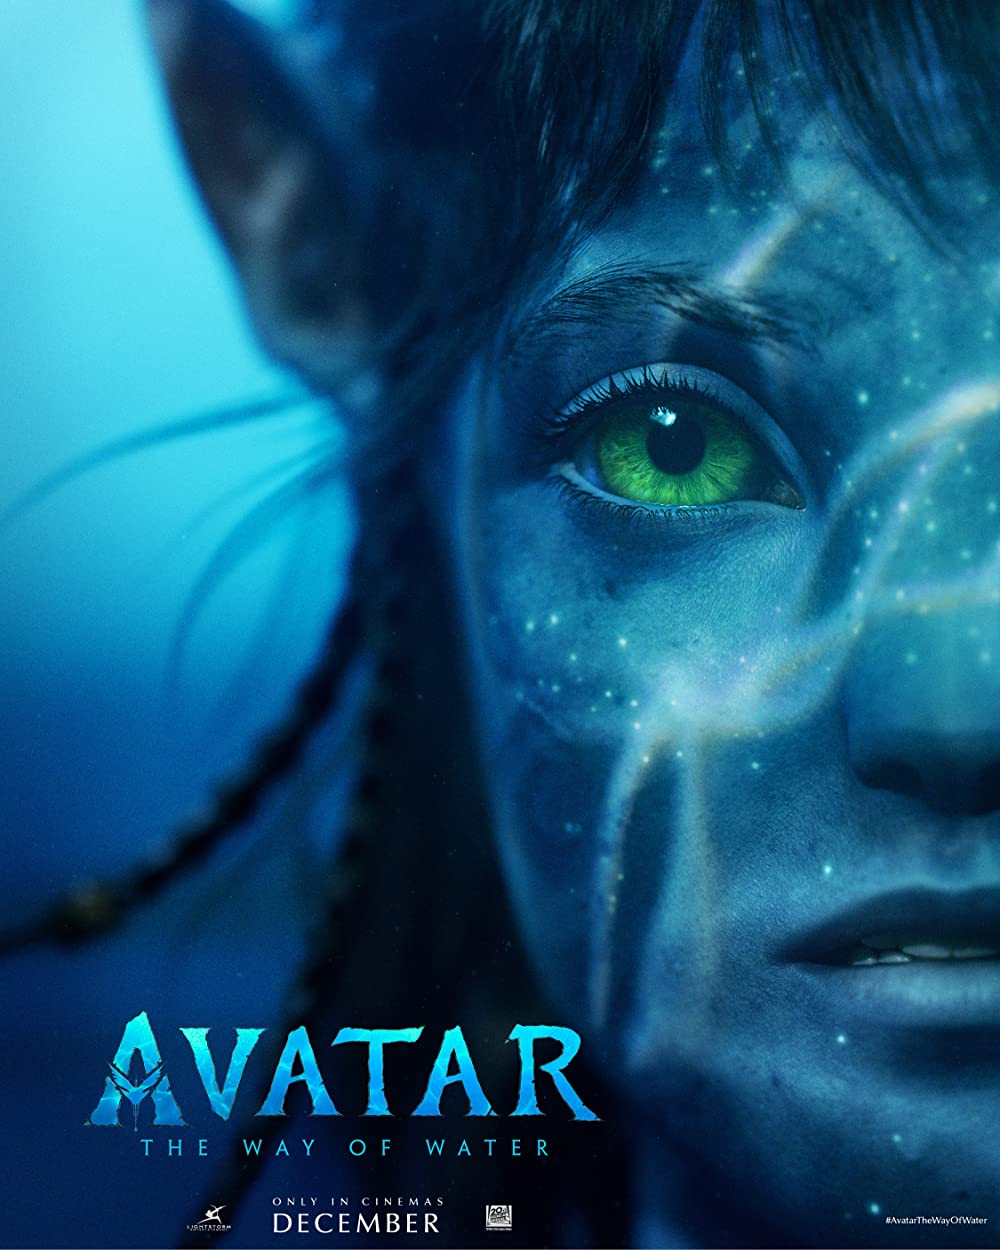 Poster on Avatar Way of Water - Courtesy of IMDB.com